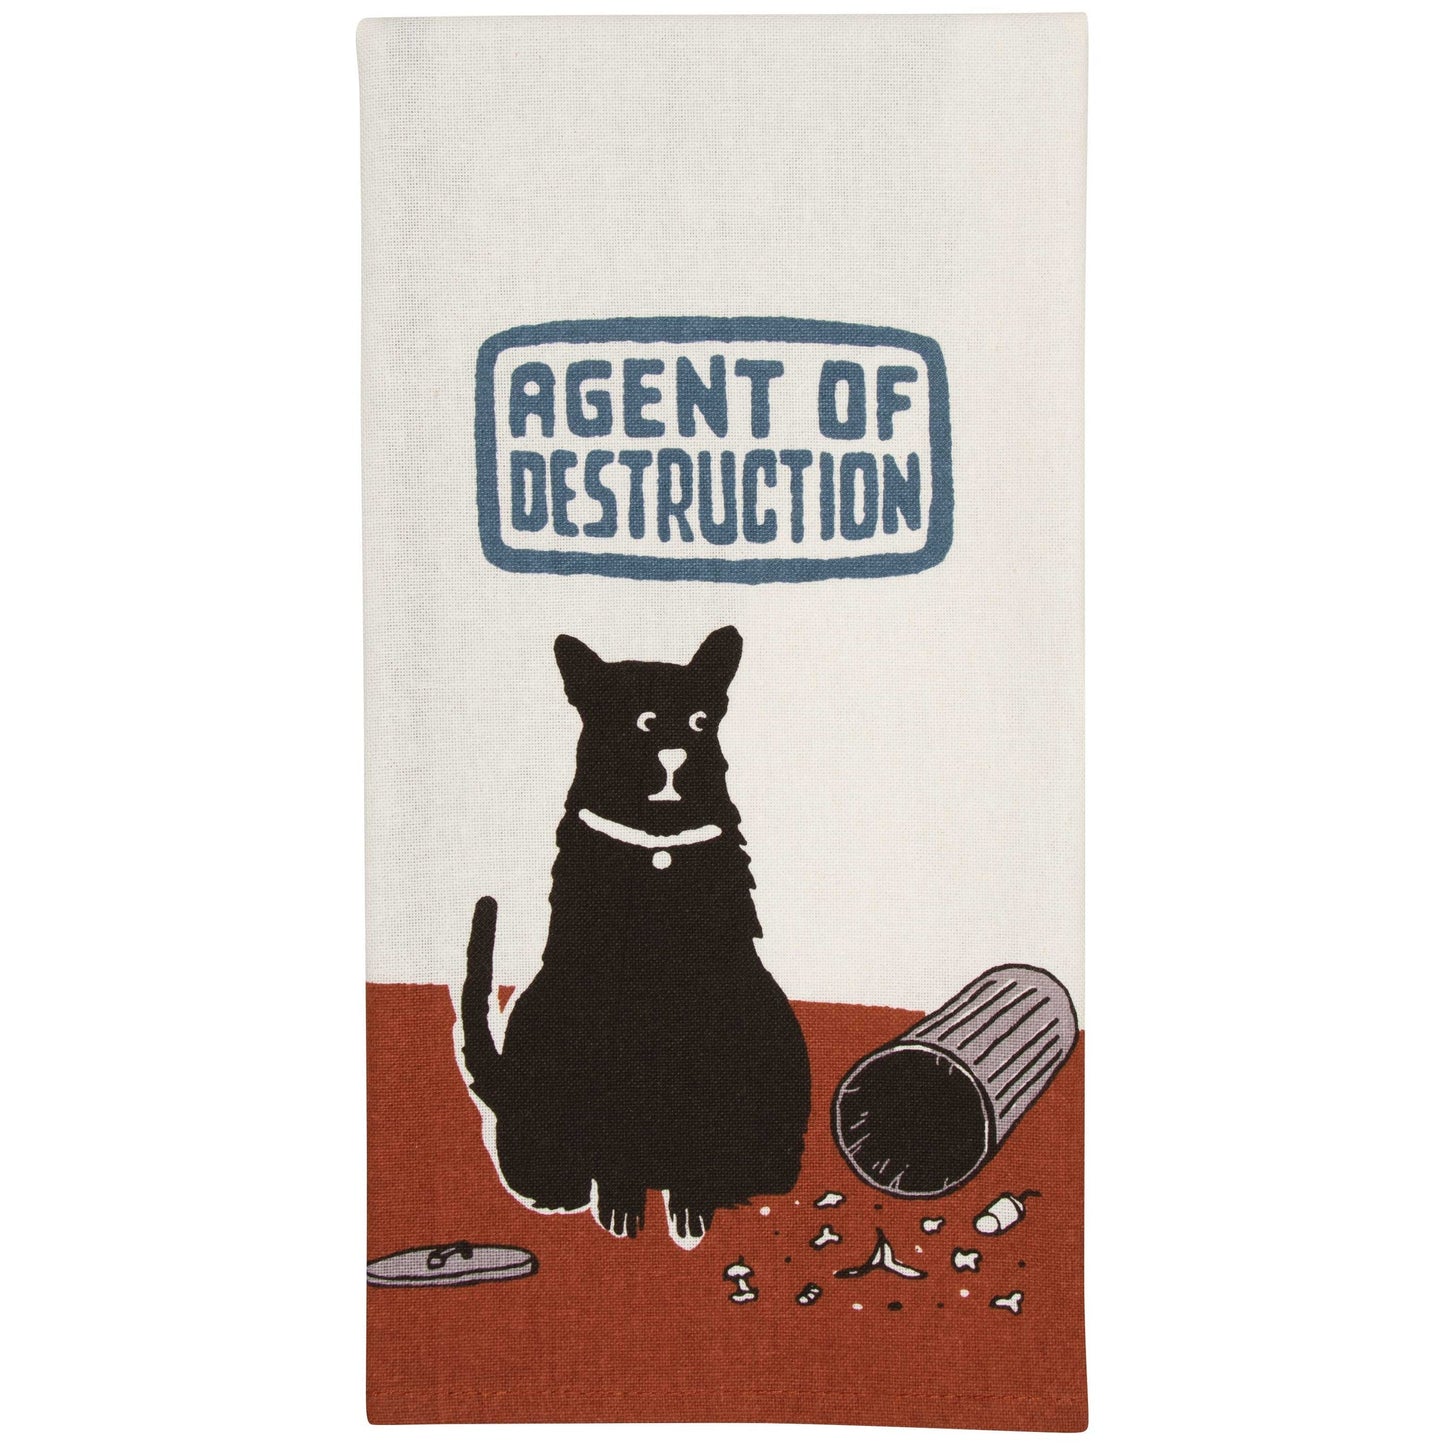 Agent Of Destruction Funny Dog Screen-Printed Kitchen Dish Cloth Towel